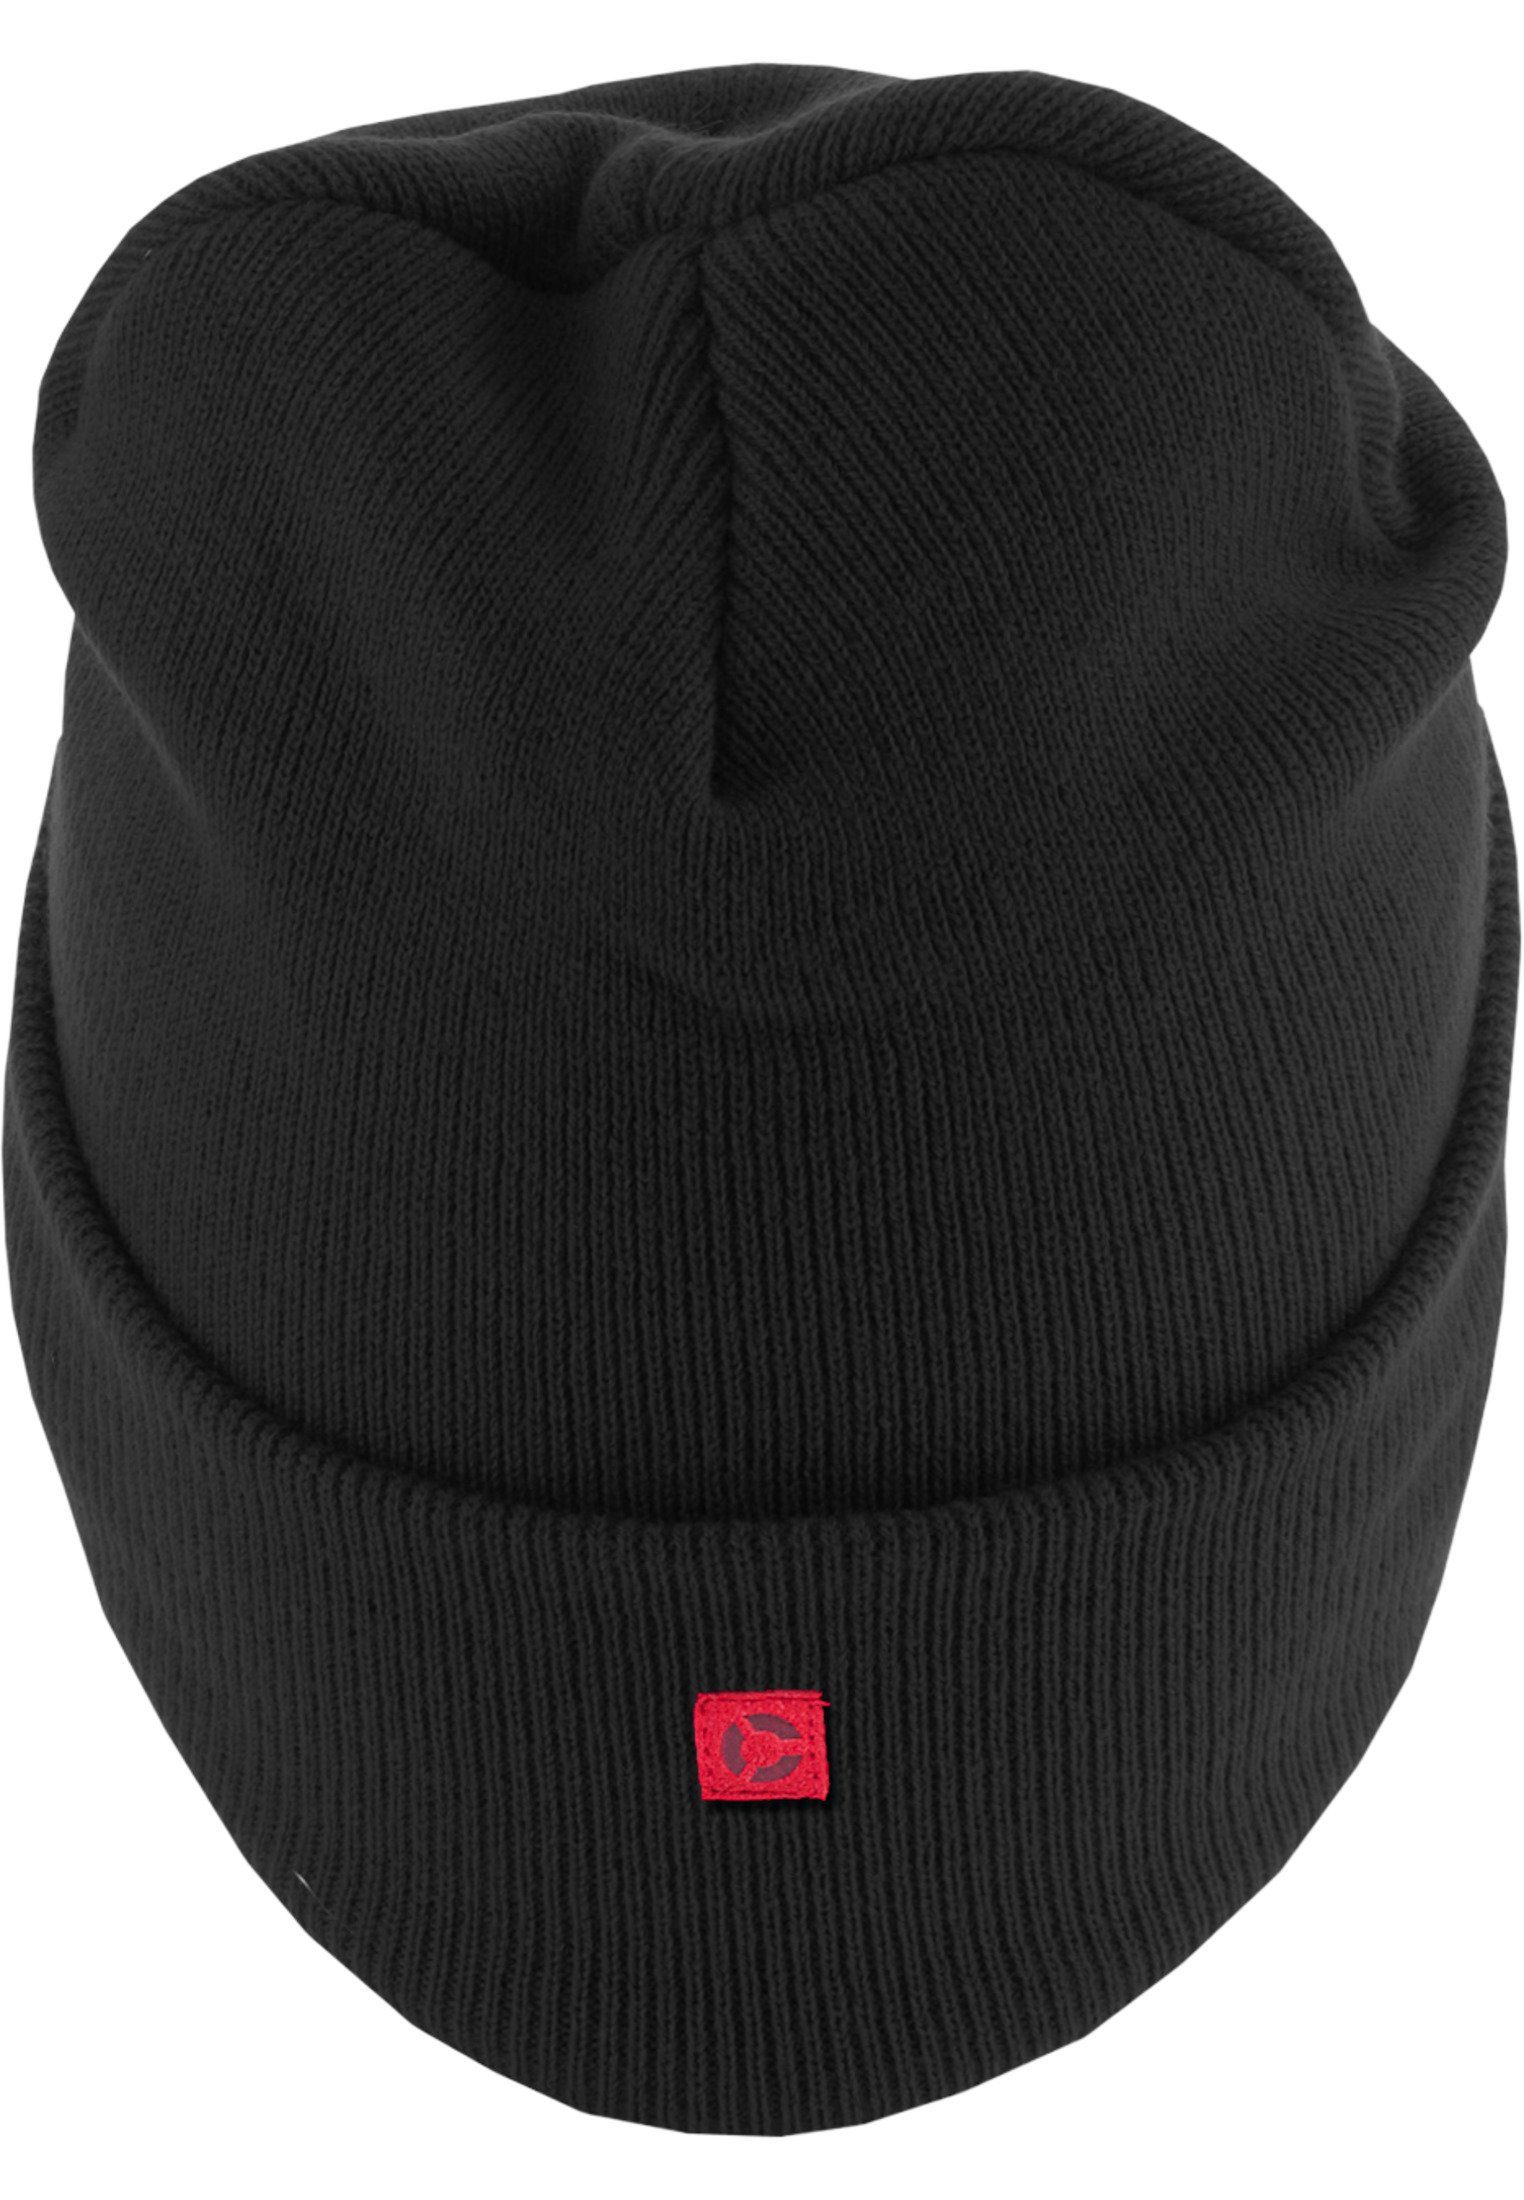 Accessoires Letter Beanie Beanie Cuff Knit (1-St) MSTRDS